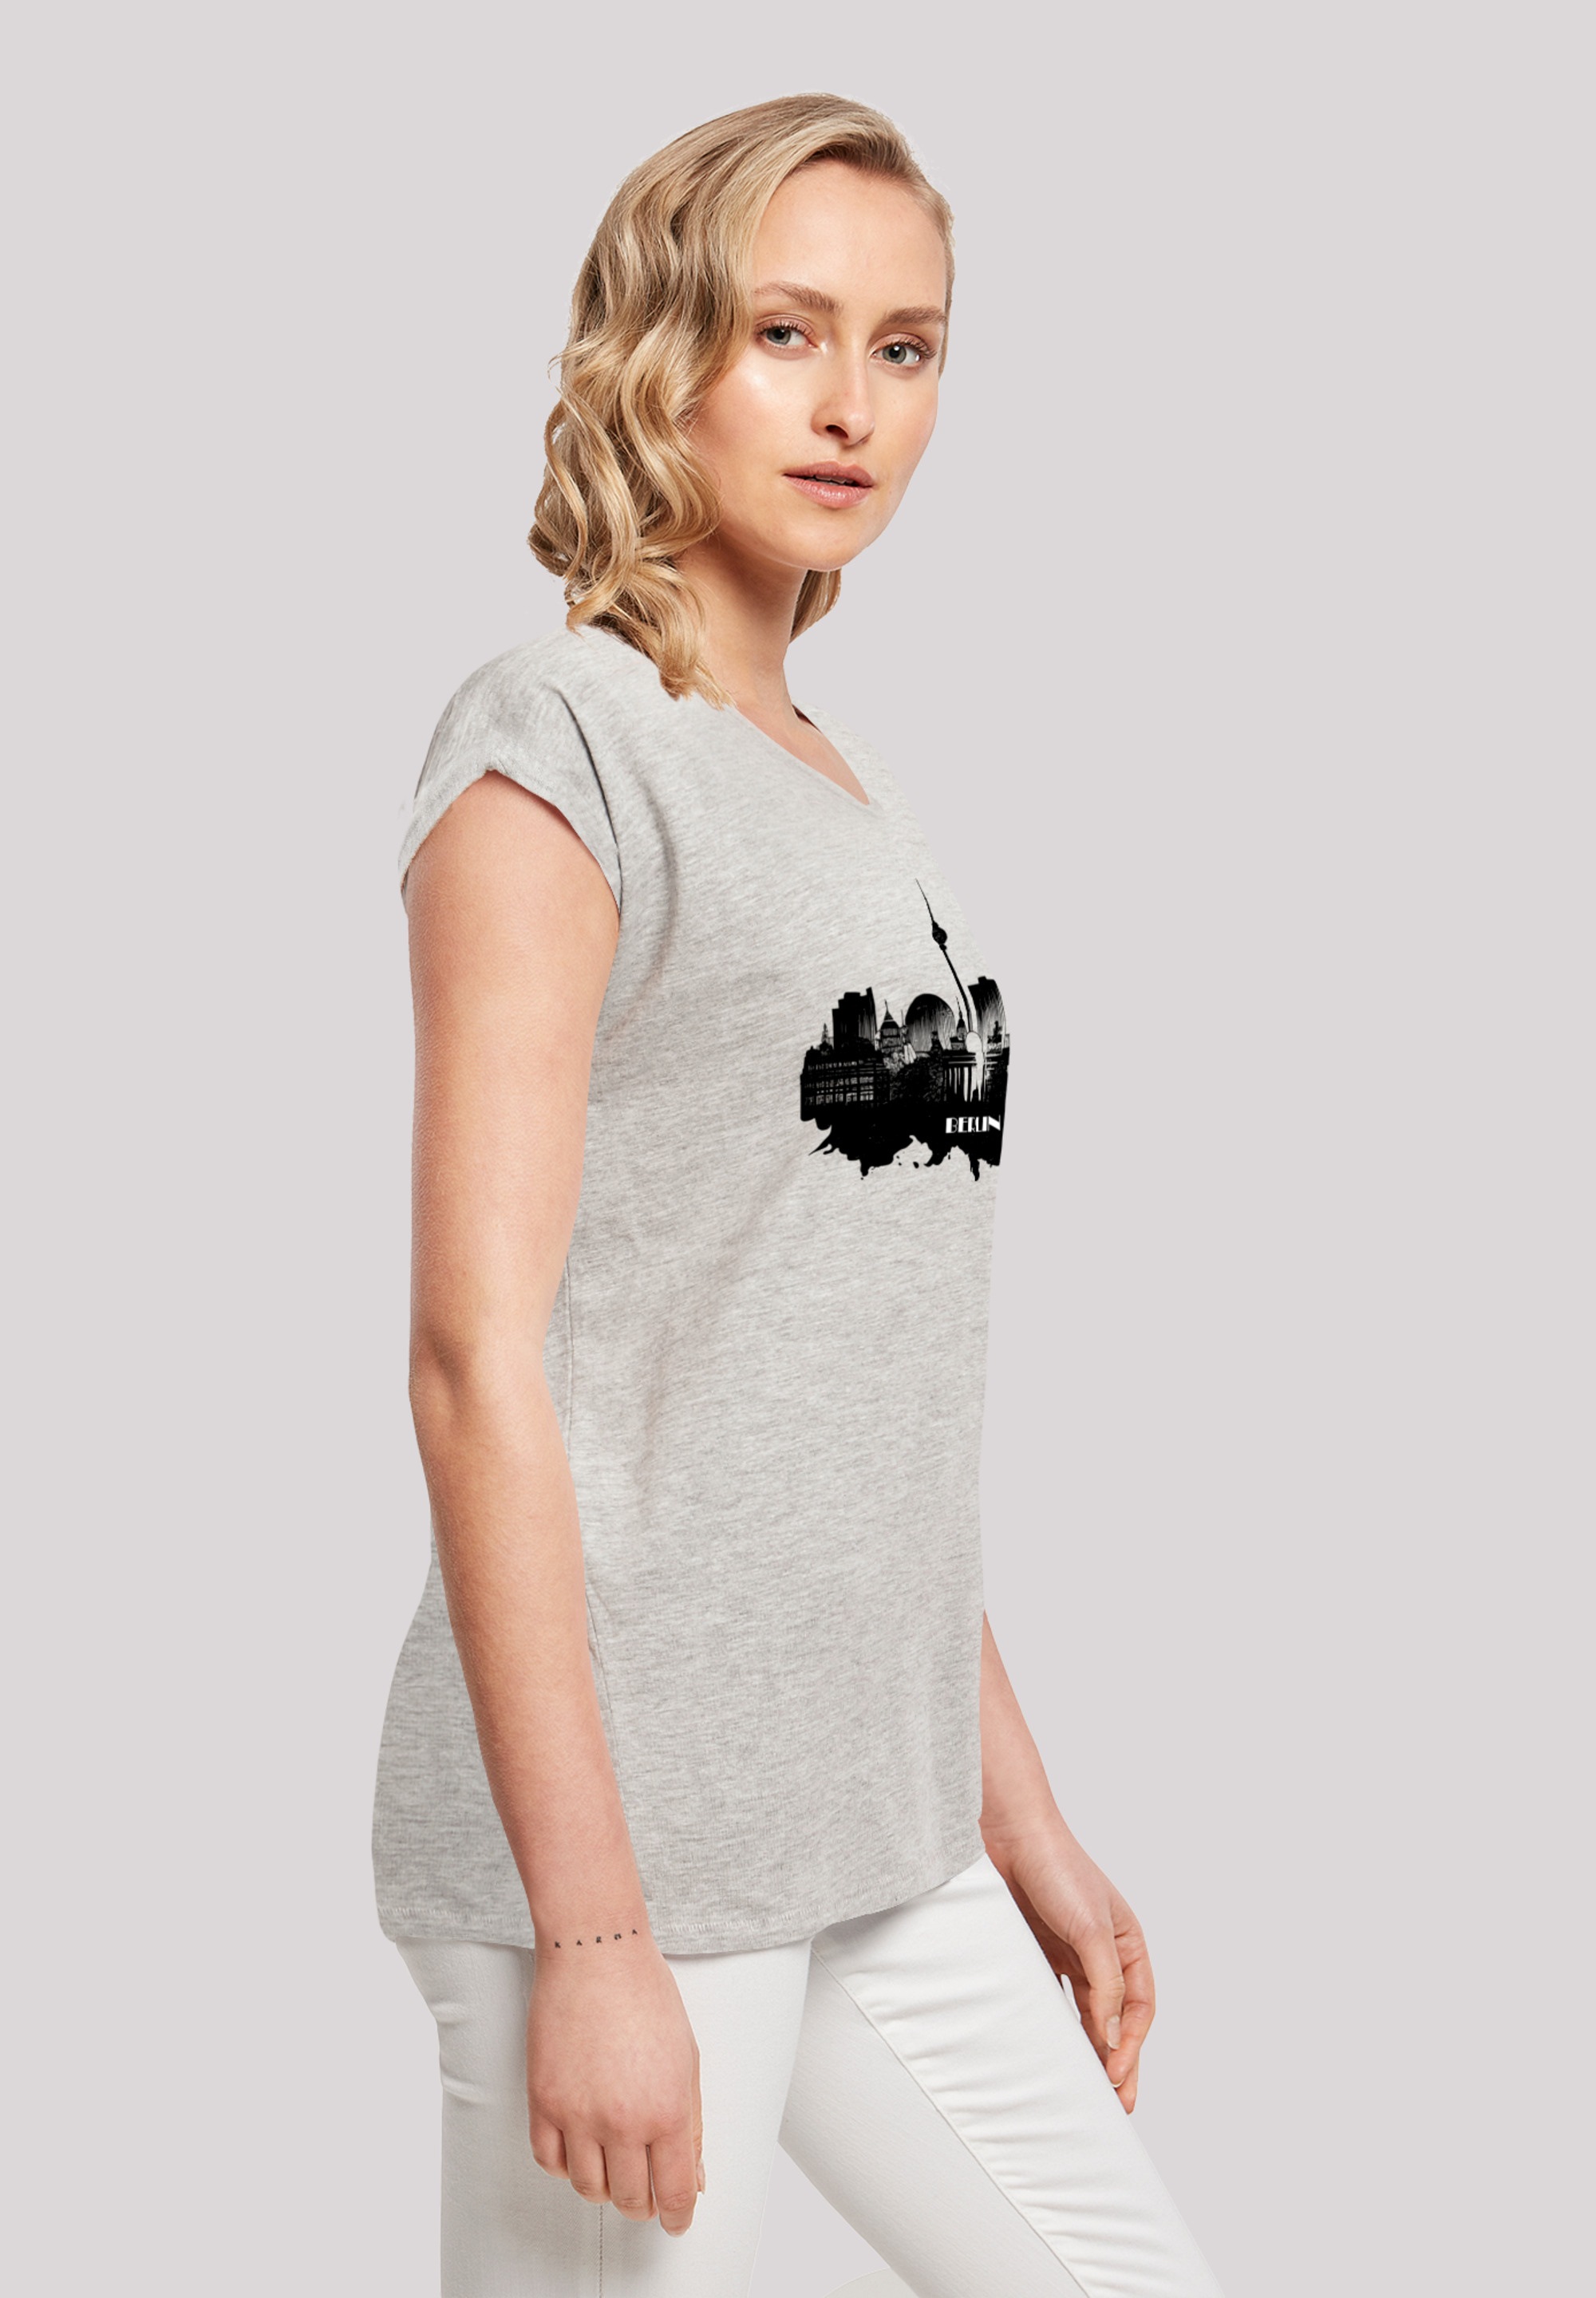 F4NT4STIC T-Shirt »Cities Collection - Berlin skyline«, Print